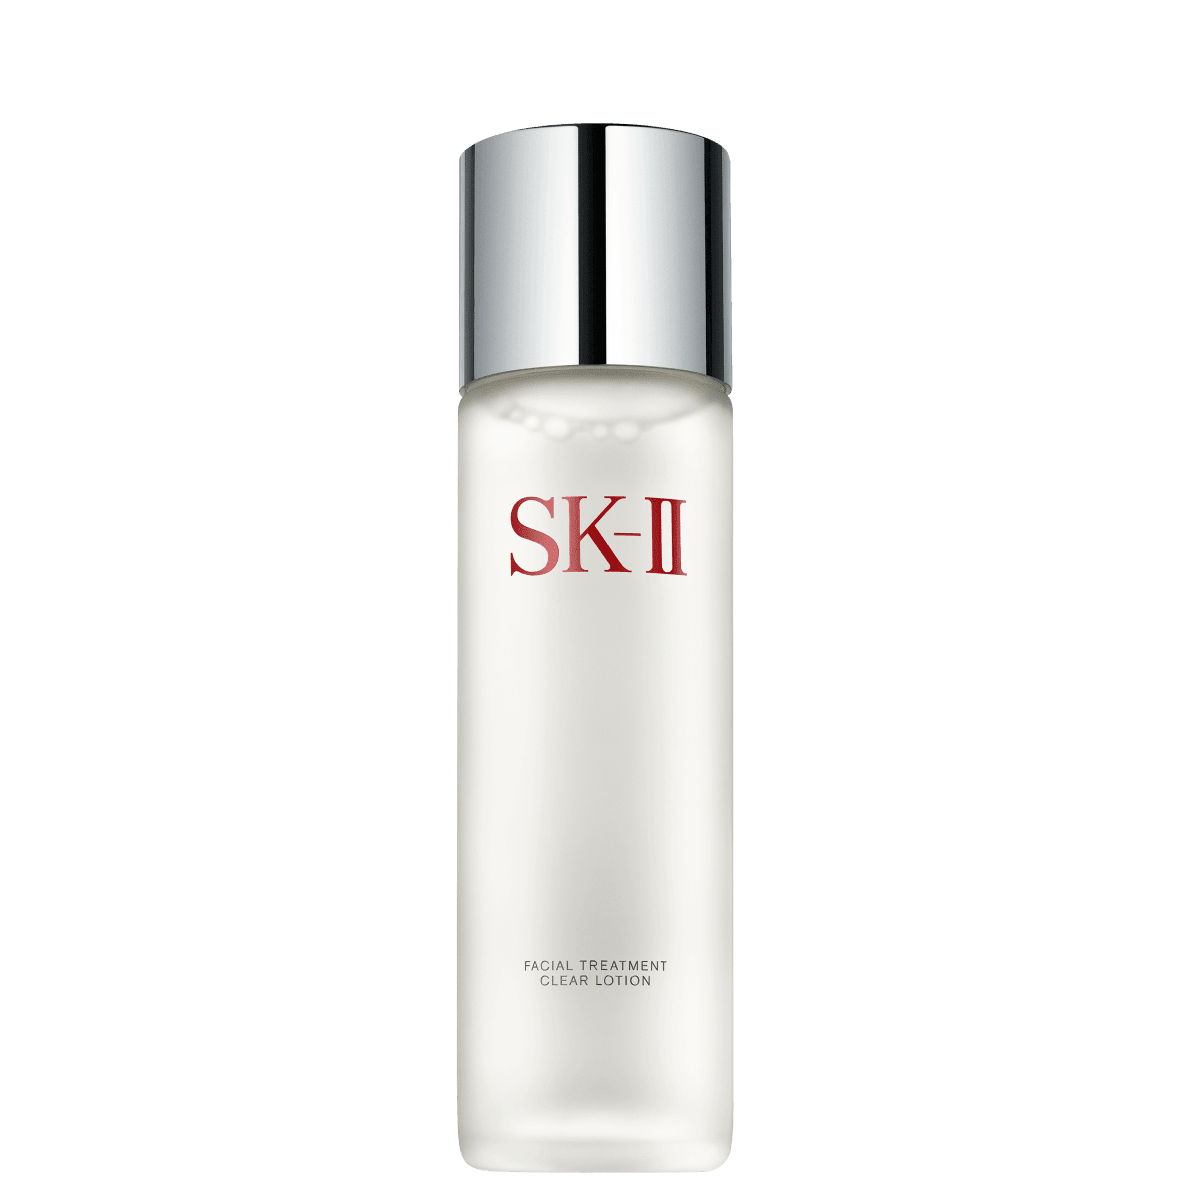 Shop Skincare Products for All Skin Types | SK-II Singapore